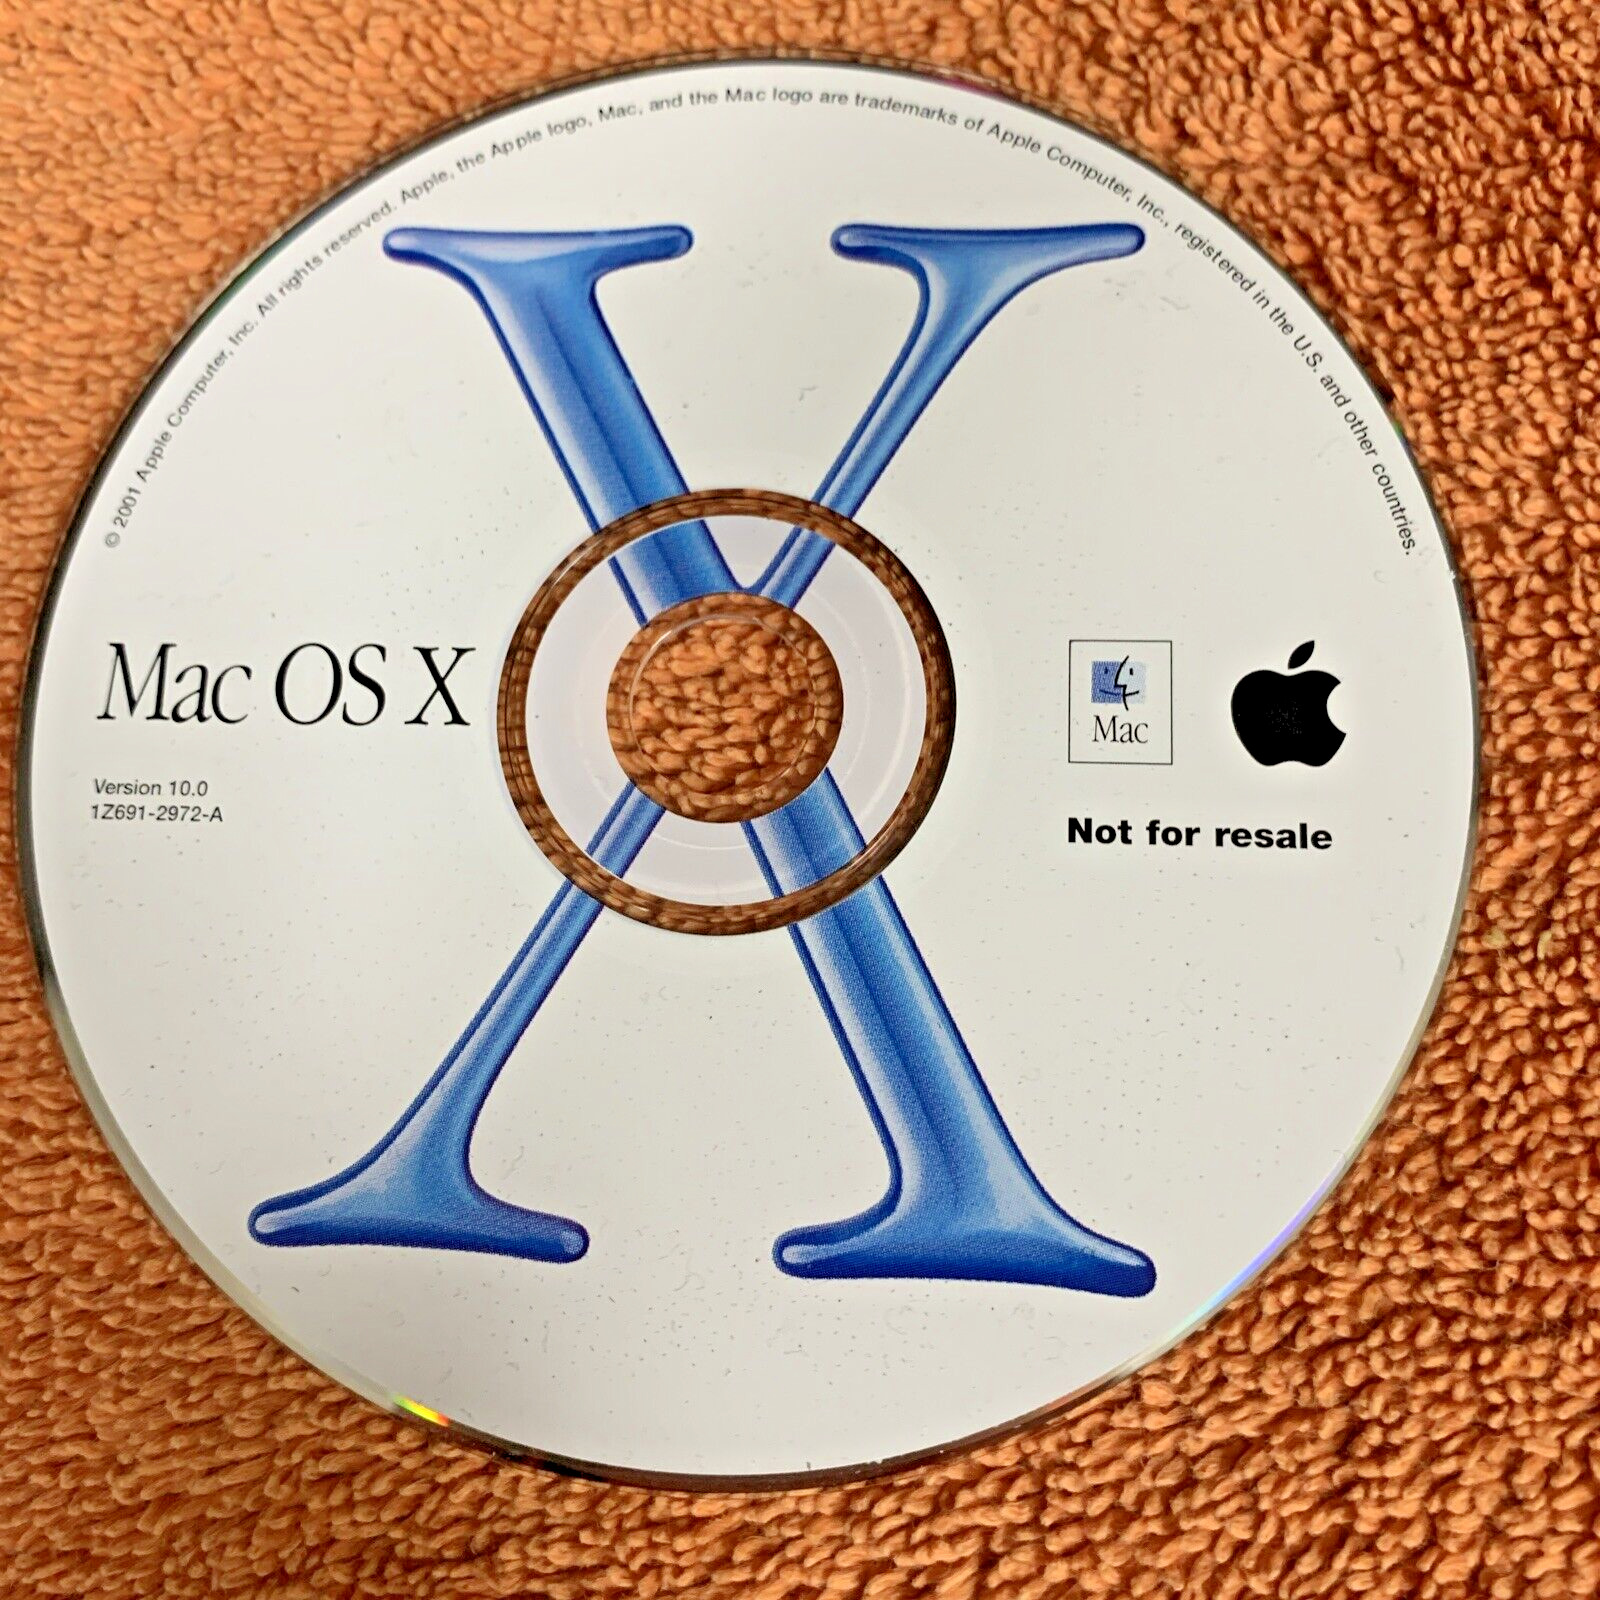 Vintage Software on CD for Macintosh OS X 10.0; dated 2001